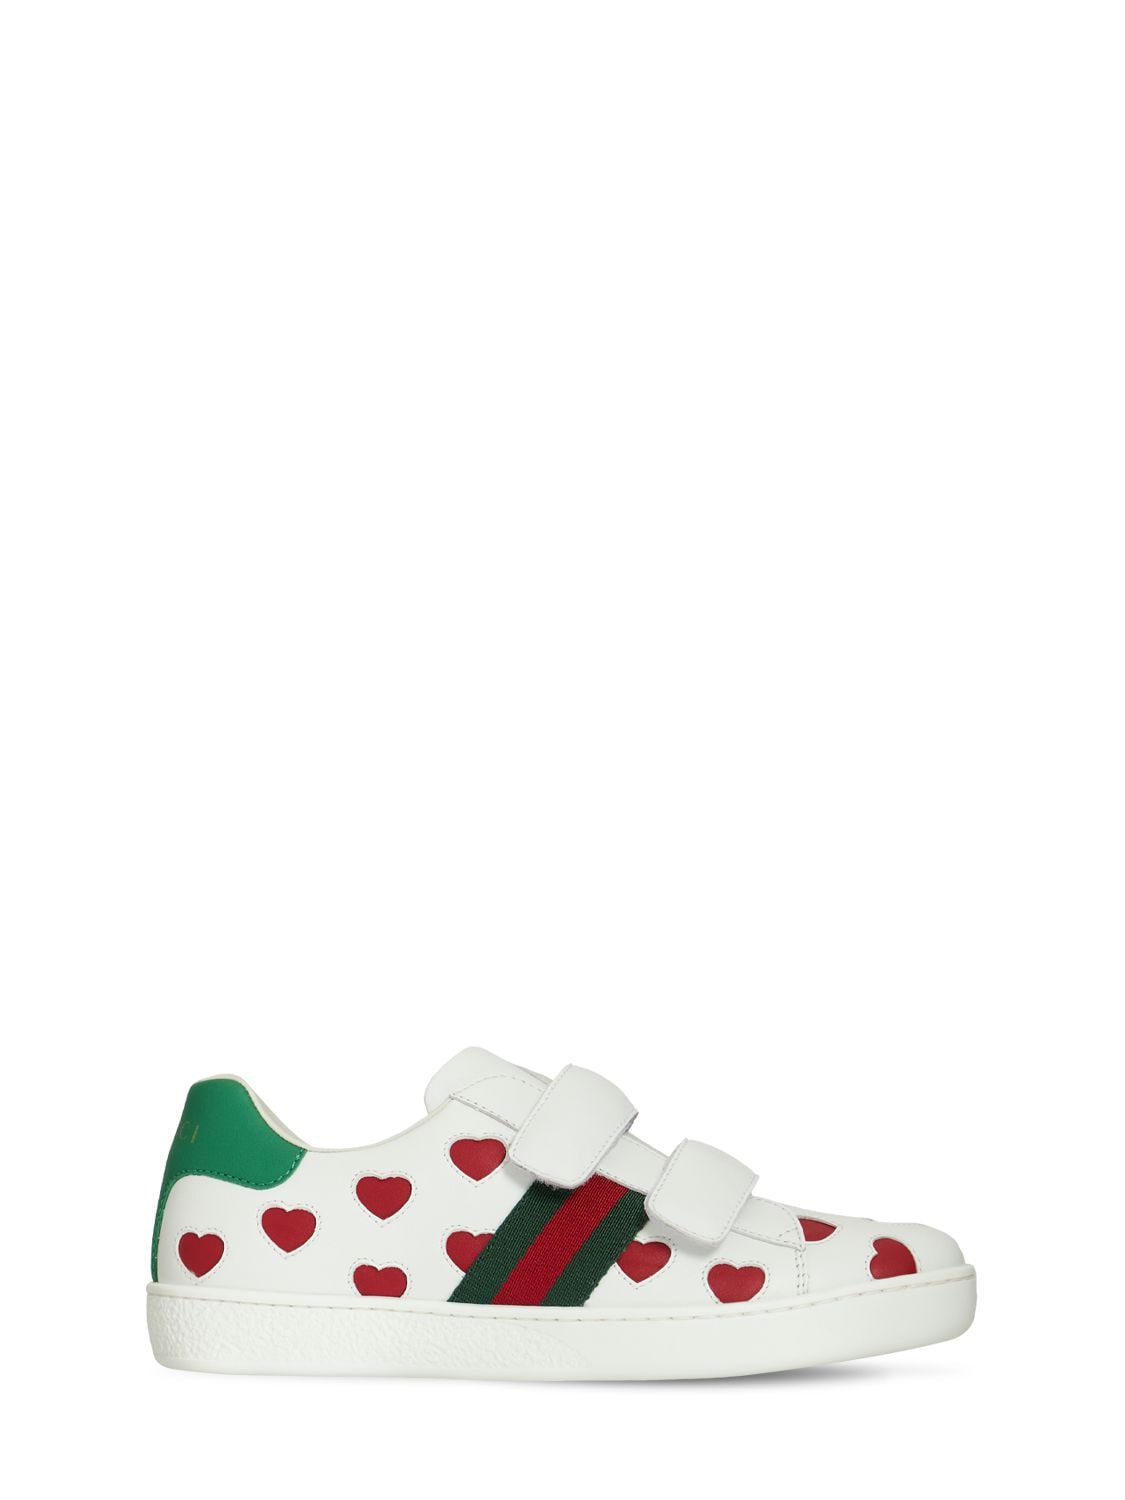 GUCCI HEART PRINT LEATHER STRAP SNEAKERS